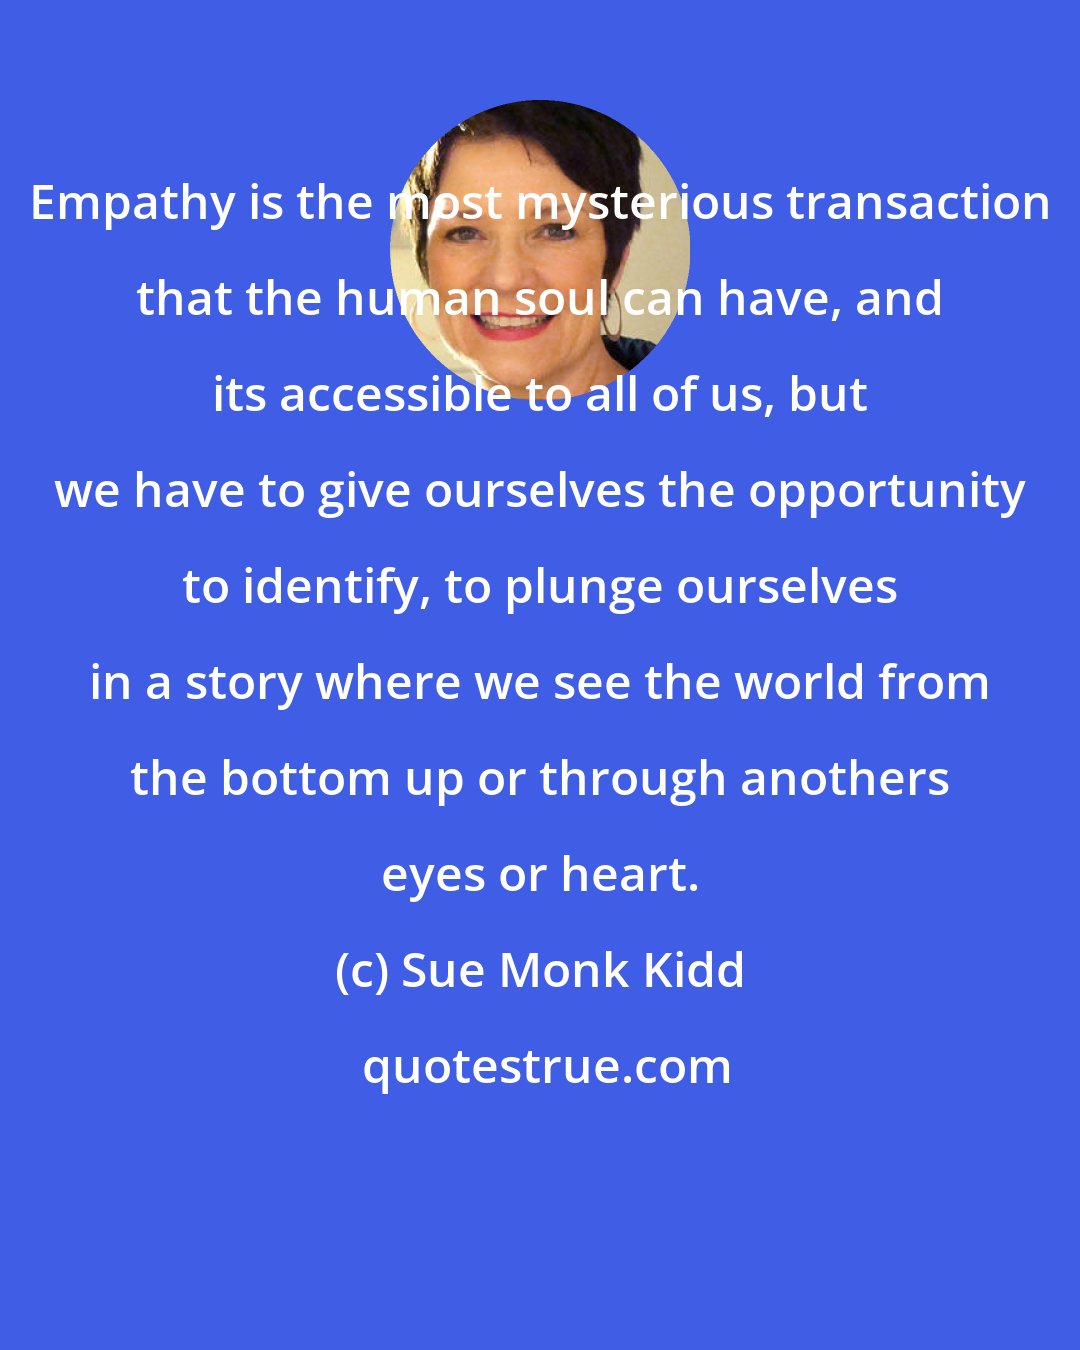 Sue Monk Kidd: Empathy is the most mysterious transaction that the human soul can have, and its accessible to all of us, but we have to give ourselves the opportunity to identify, to plunge ourselves in a story where we see the world from the bottom up or through anothers eyes or heart.